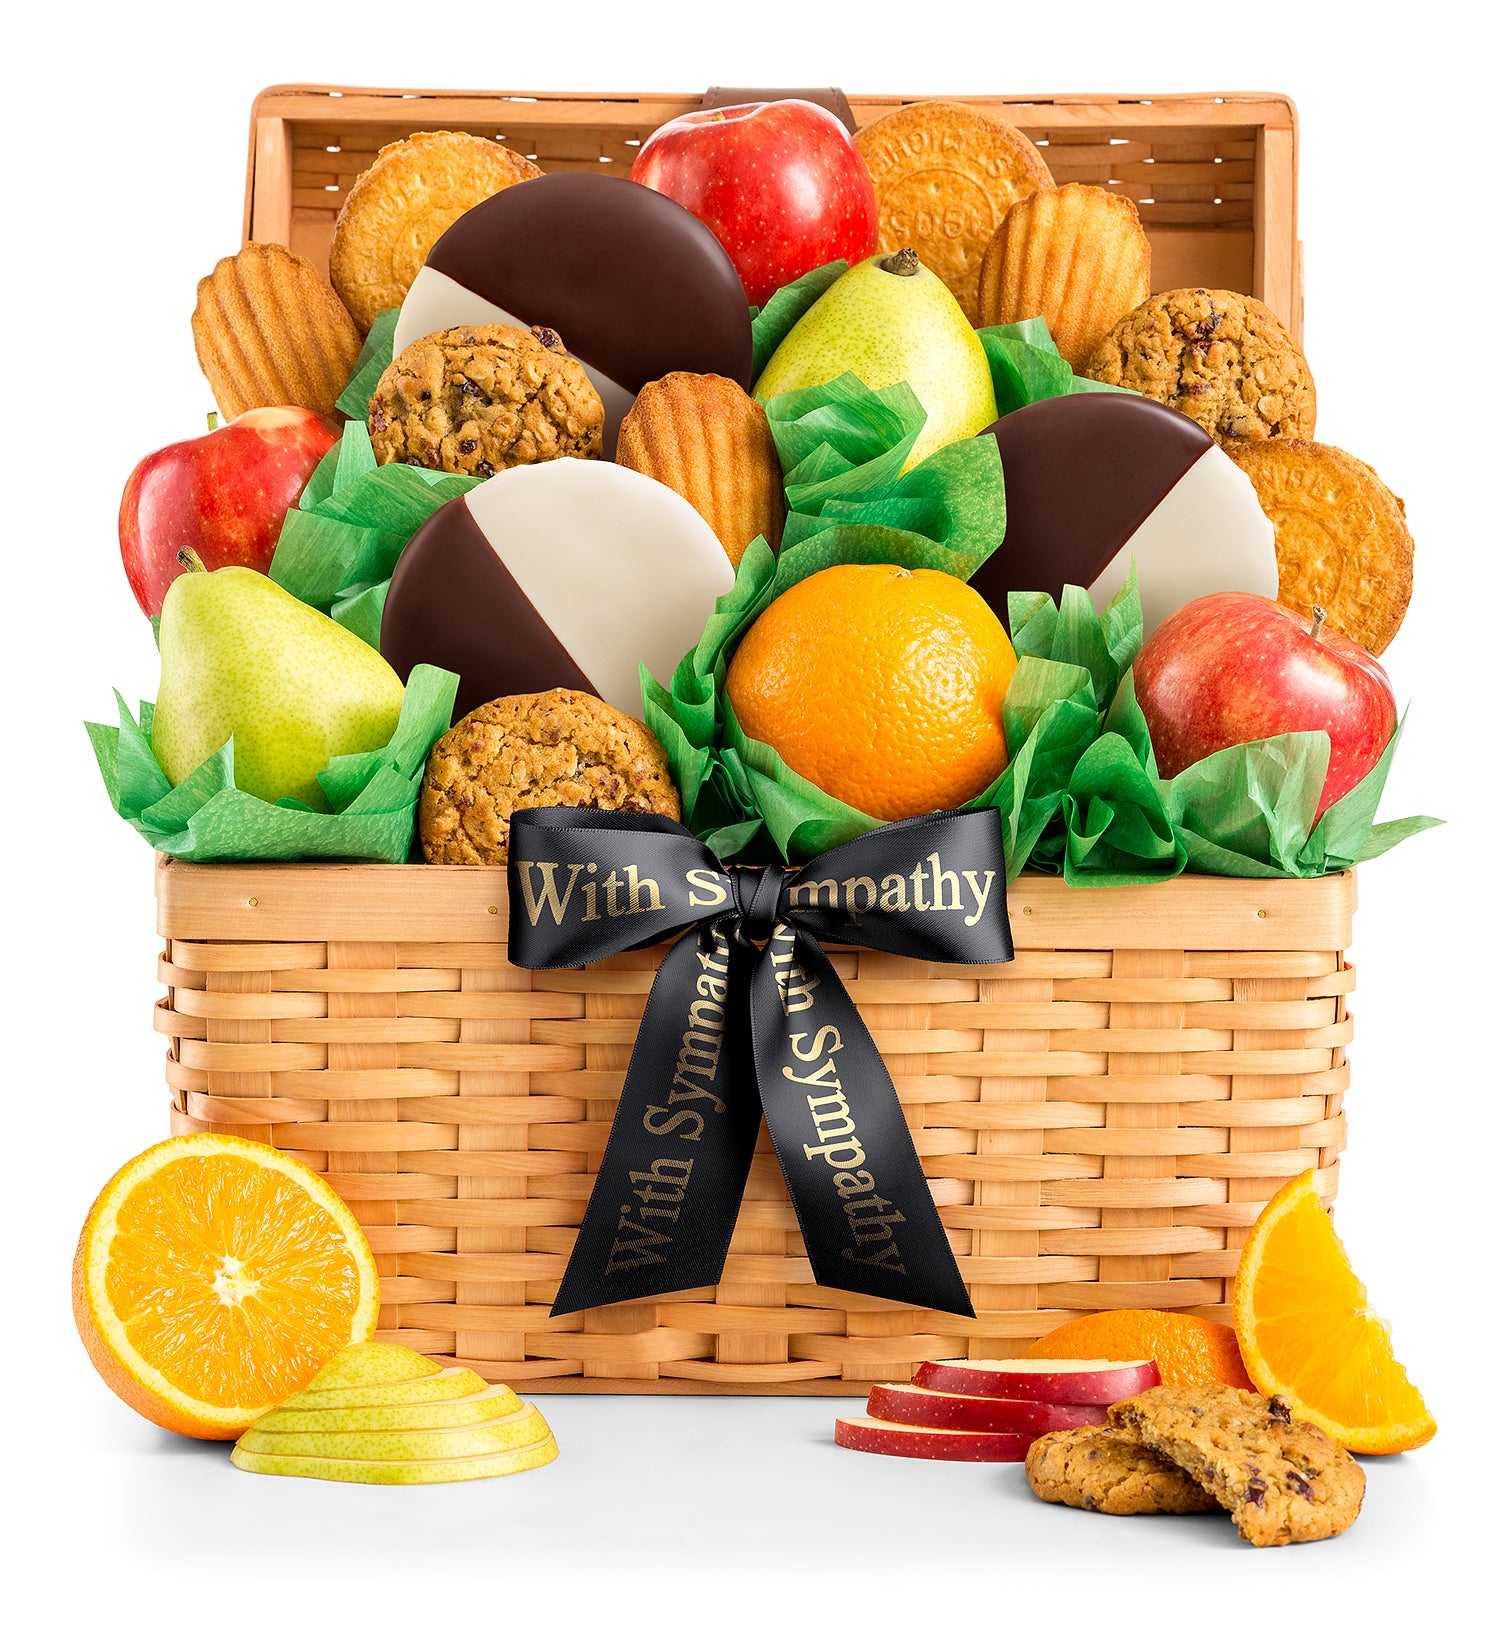 With Sympathy Premium Grade Fruit and Cookies Basket